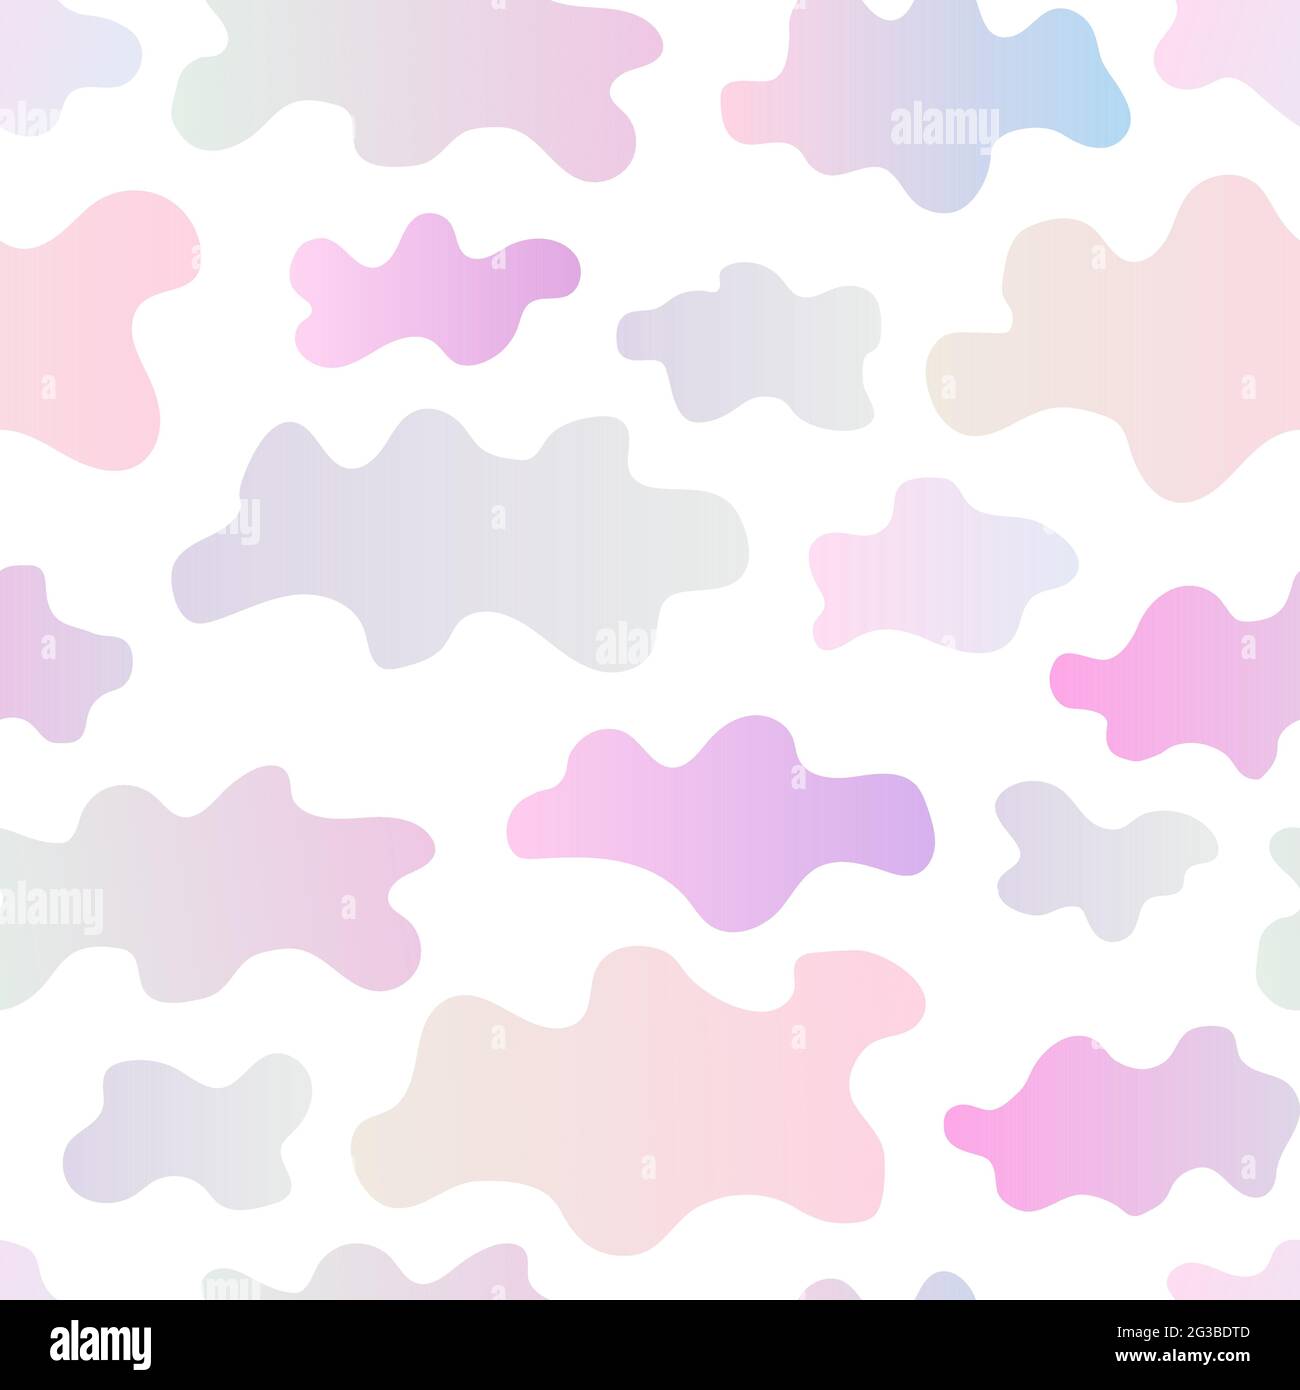 Seamless abstract clouds pattern. Gradient clouds isolated on white background. Pastel colorful hand drawn cumulus clouds. Summer bright Light cartoon Stock Vector